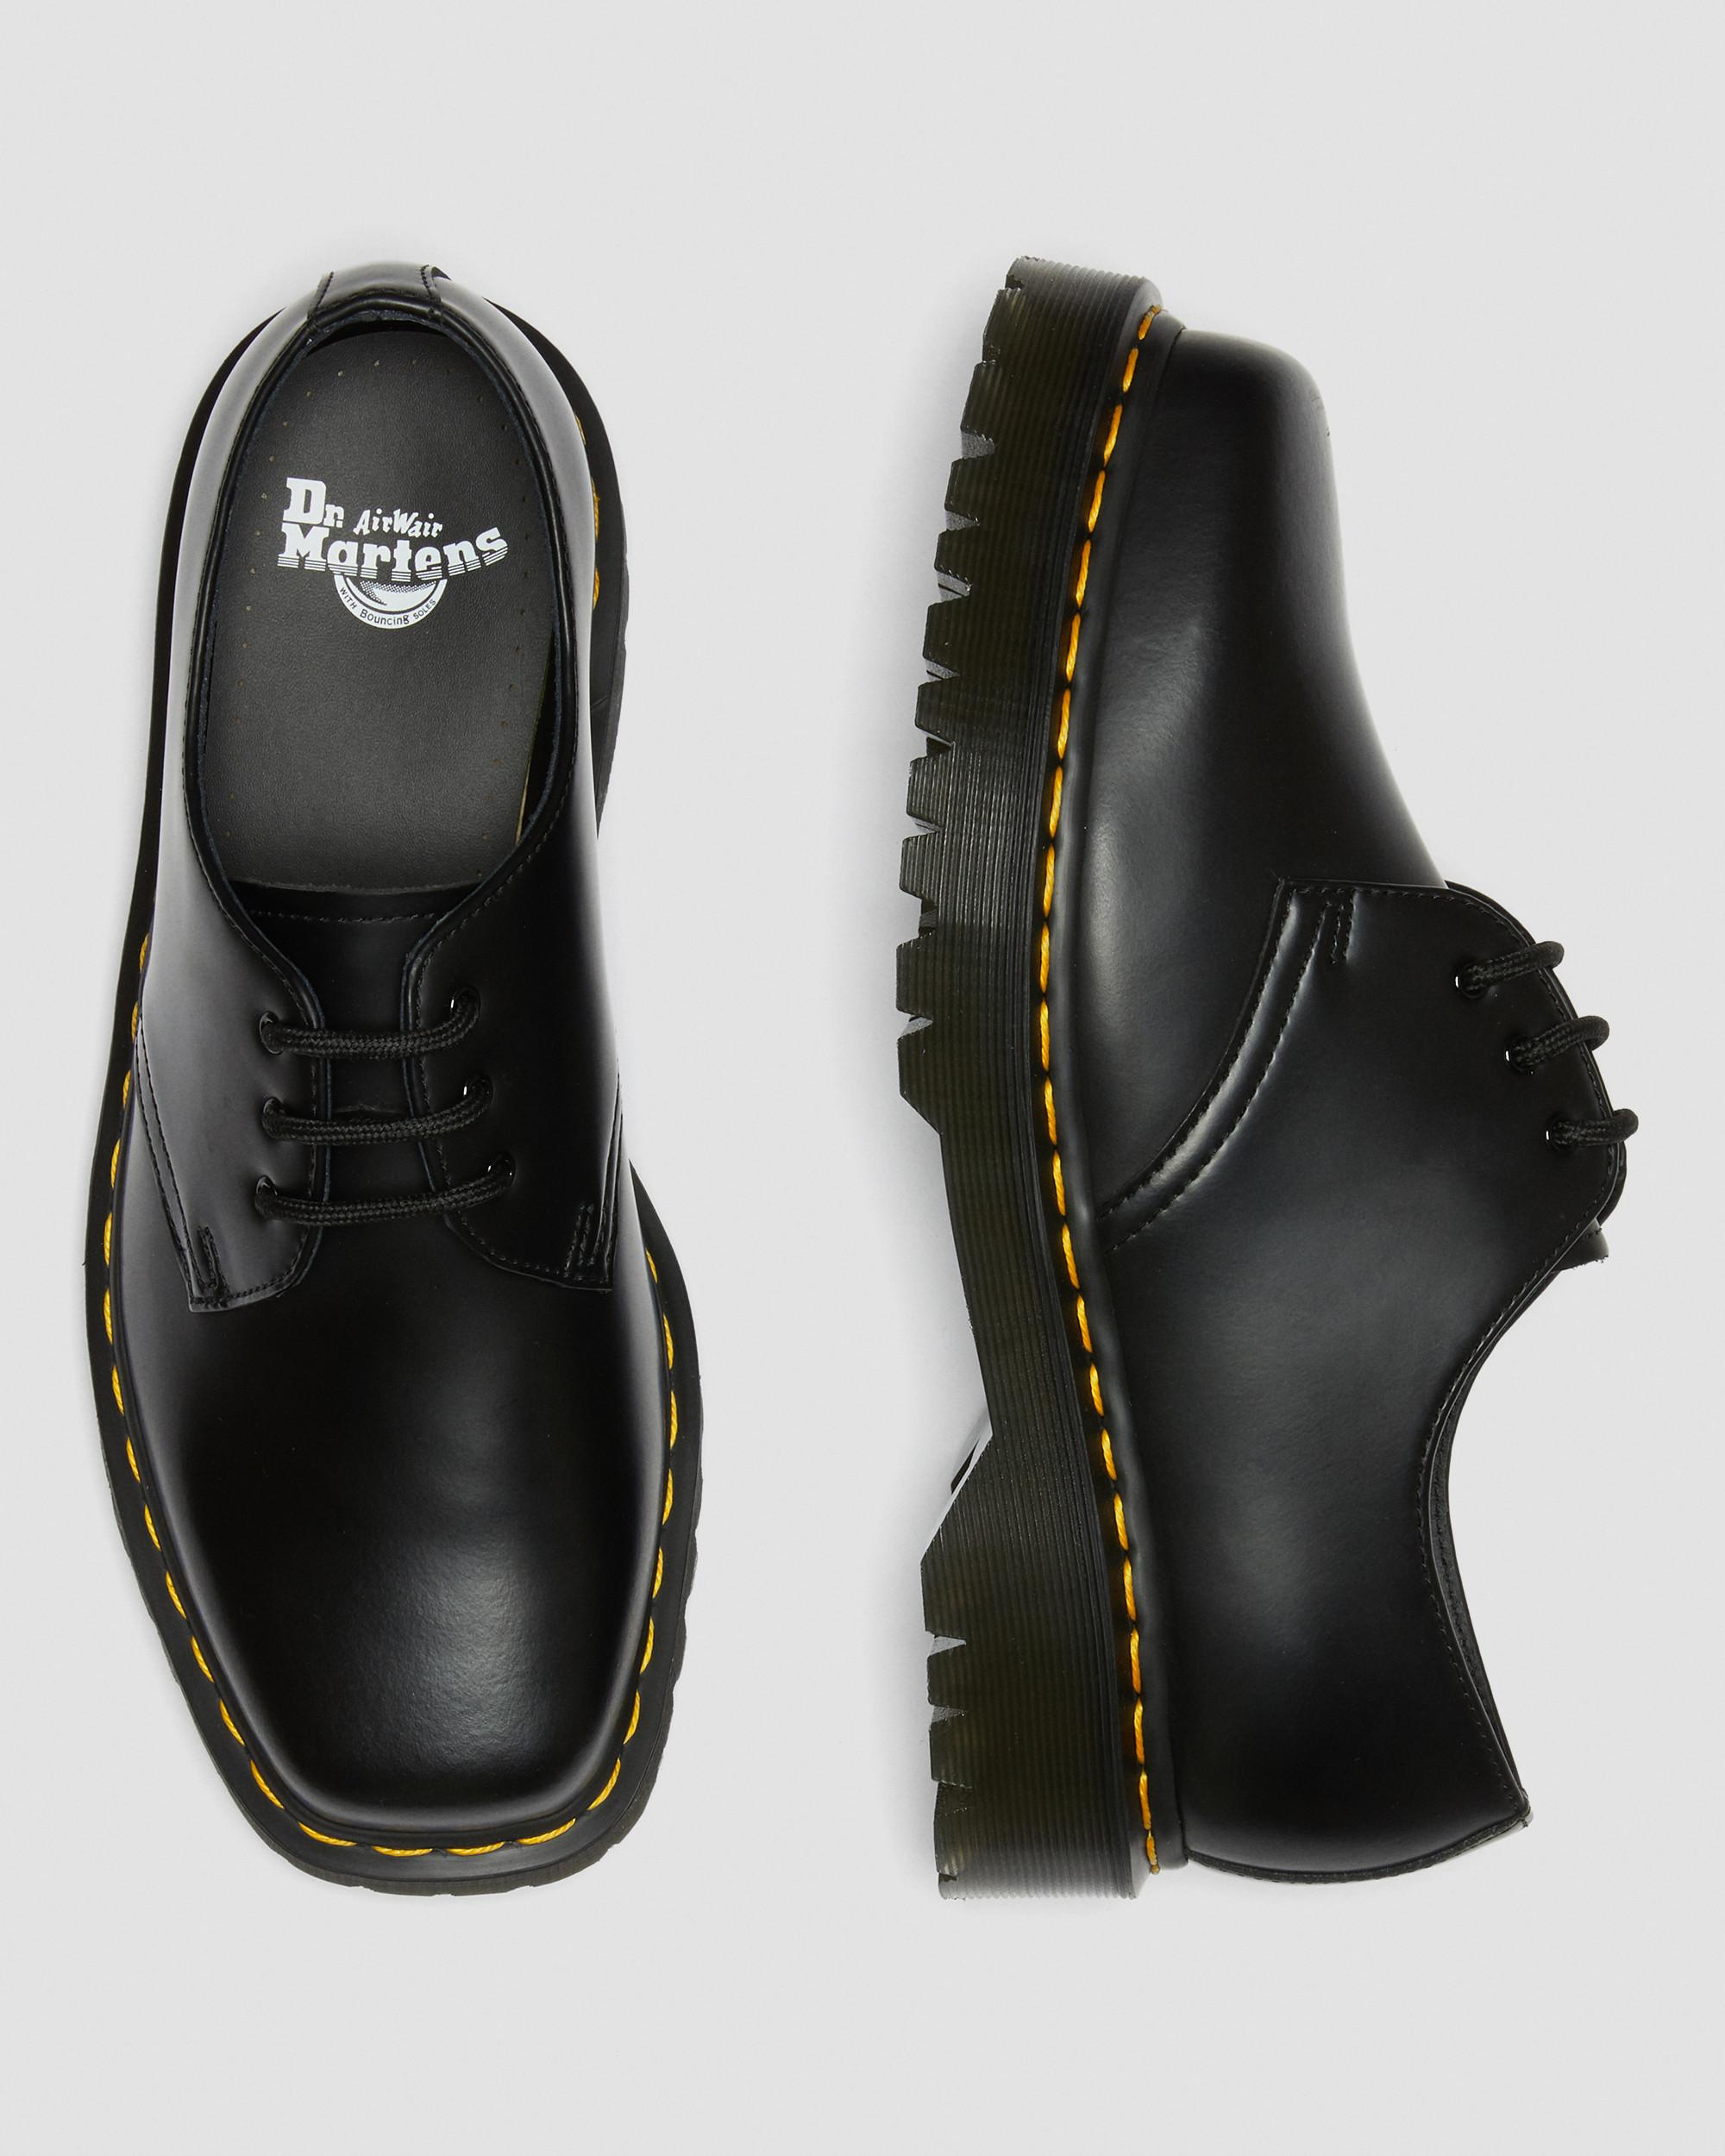 1461 Bex Squared Toe Leather Oxford Shoes | Dr. Martens